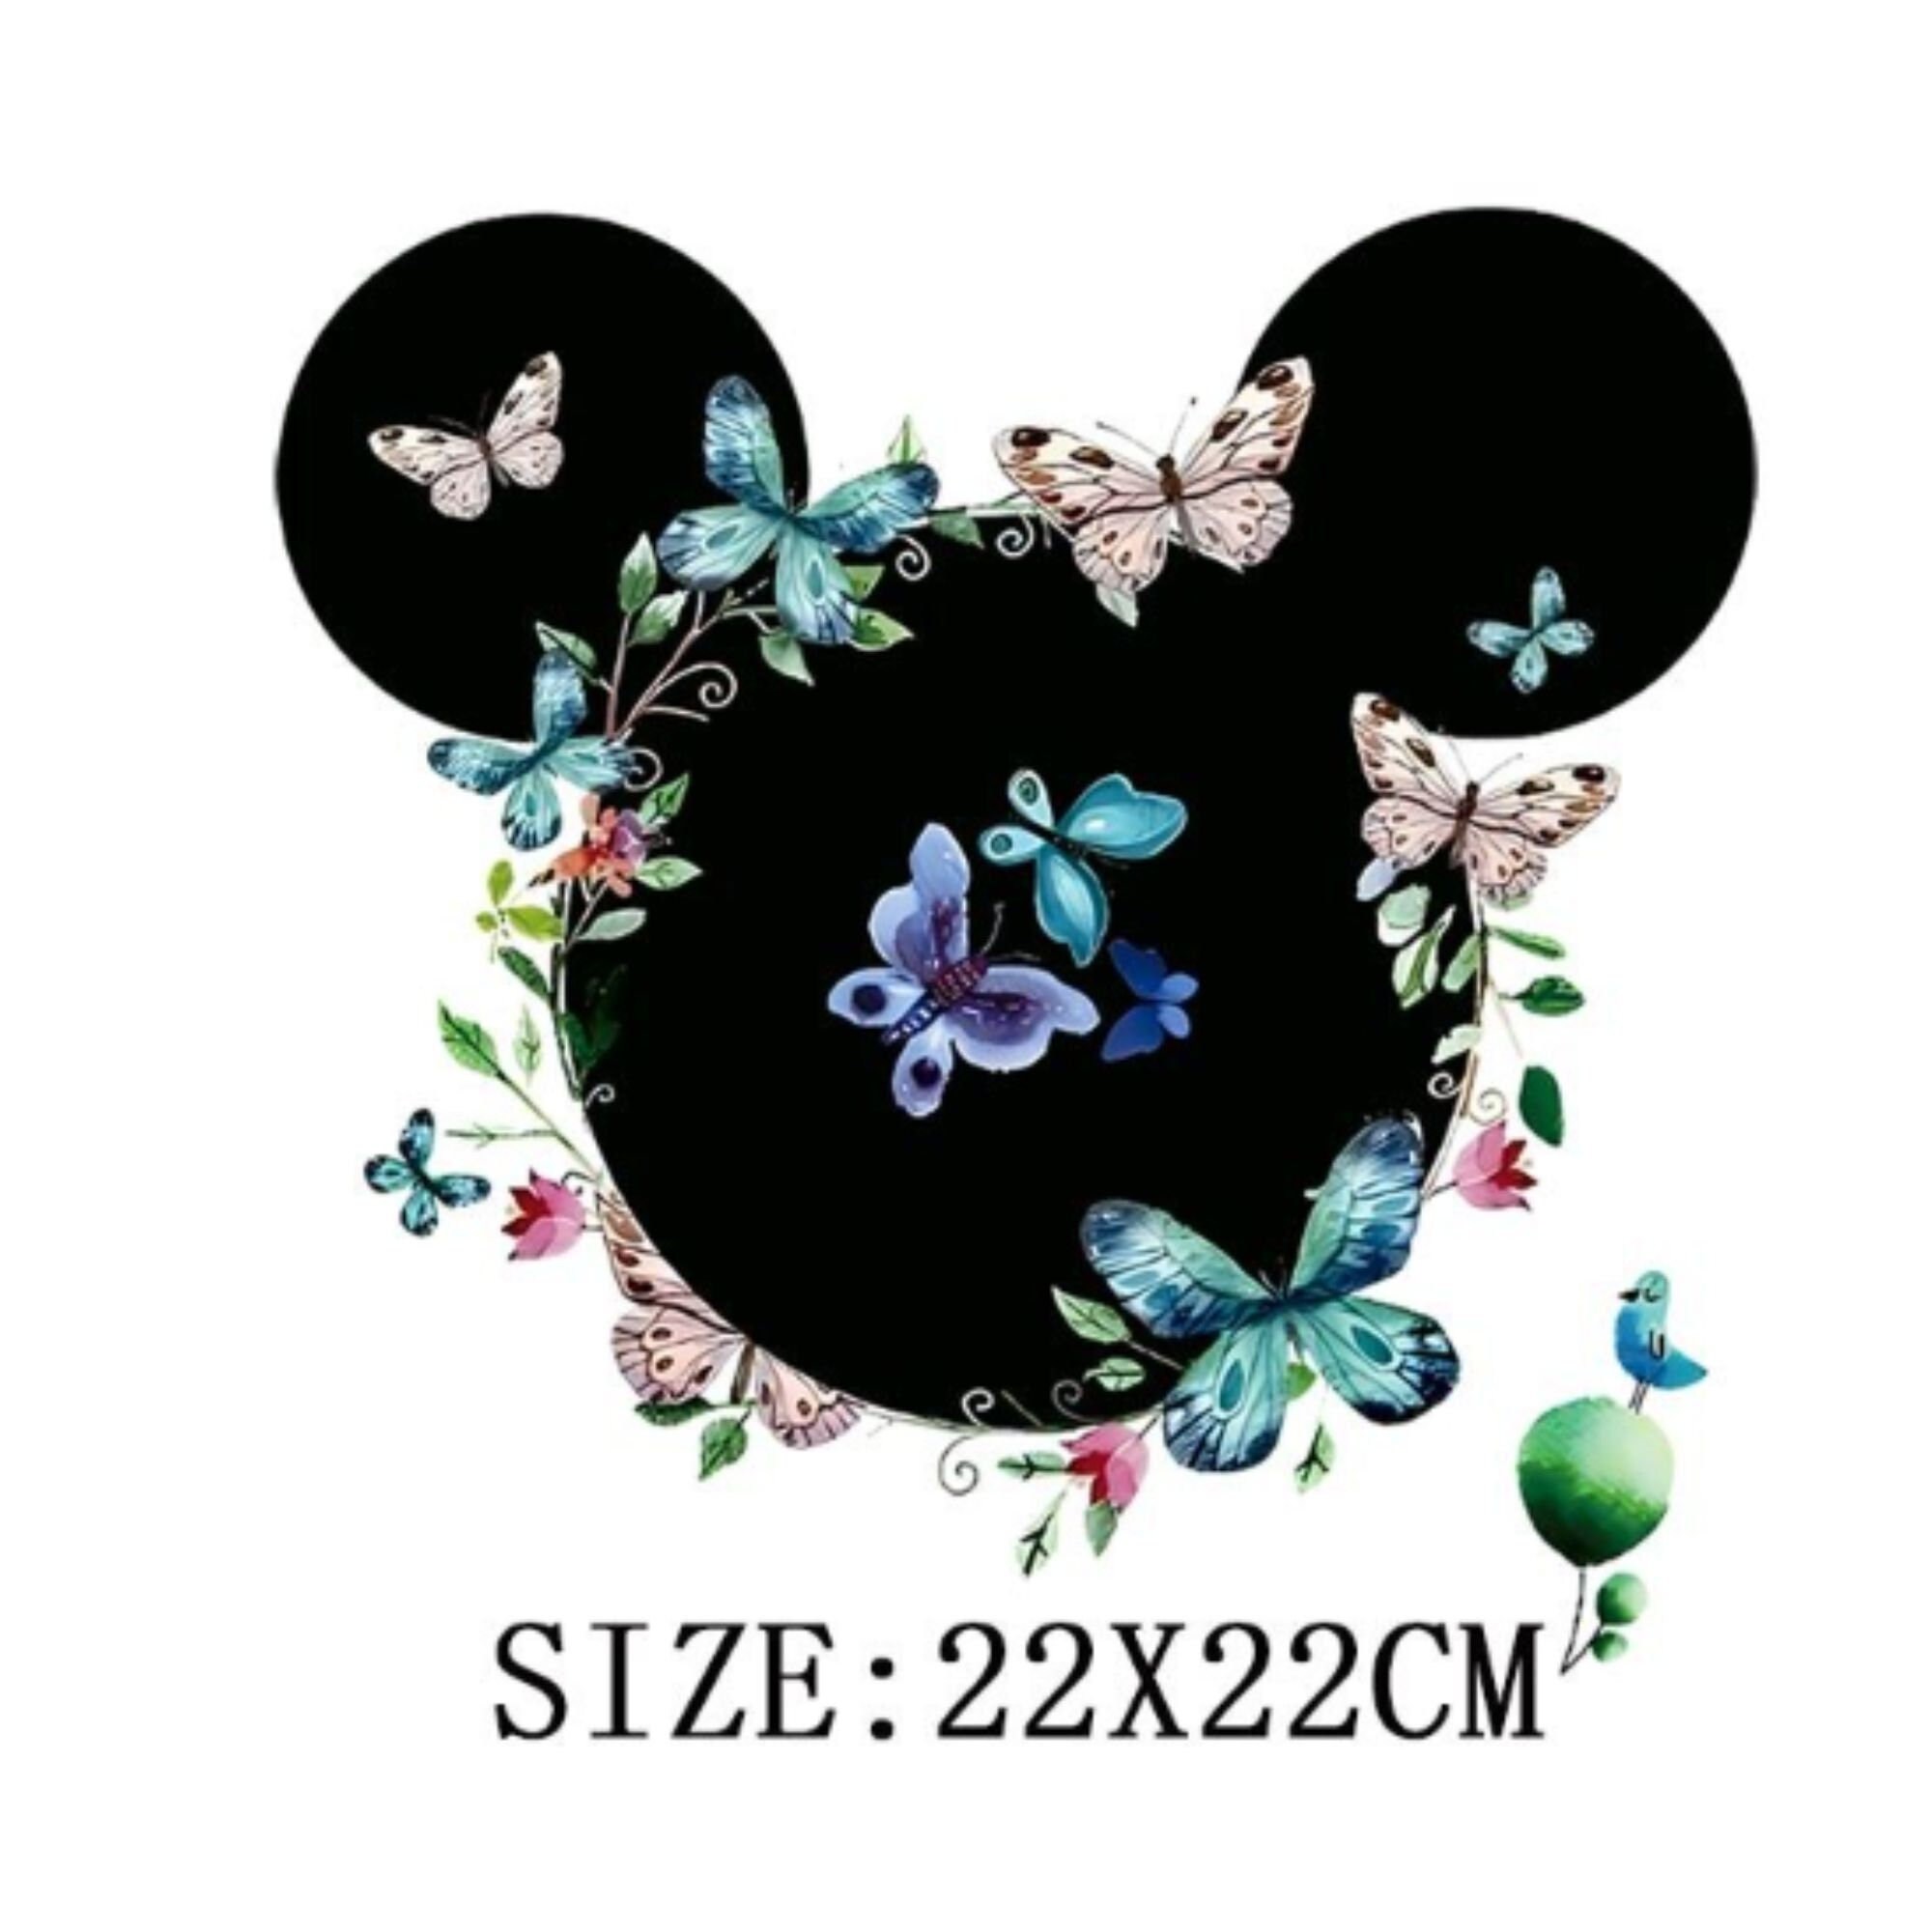 SPECIAL OFFER!!! 12 Disney Inspired theme Crystal Mickey Mouse Flower Pins  Bouquet pins Brides Wedding Accessories